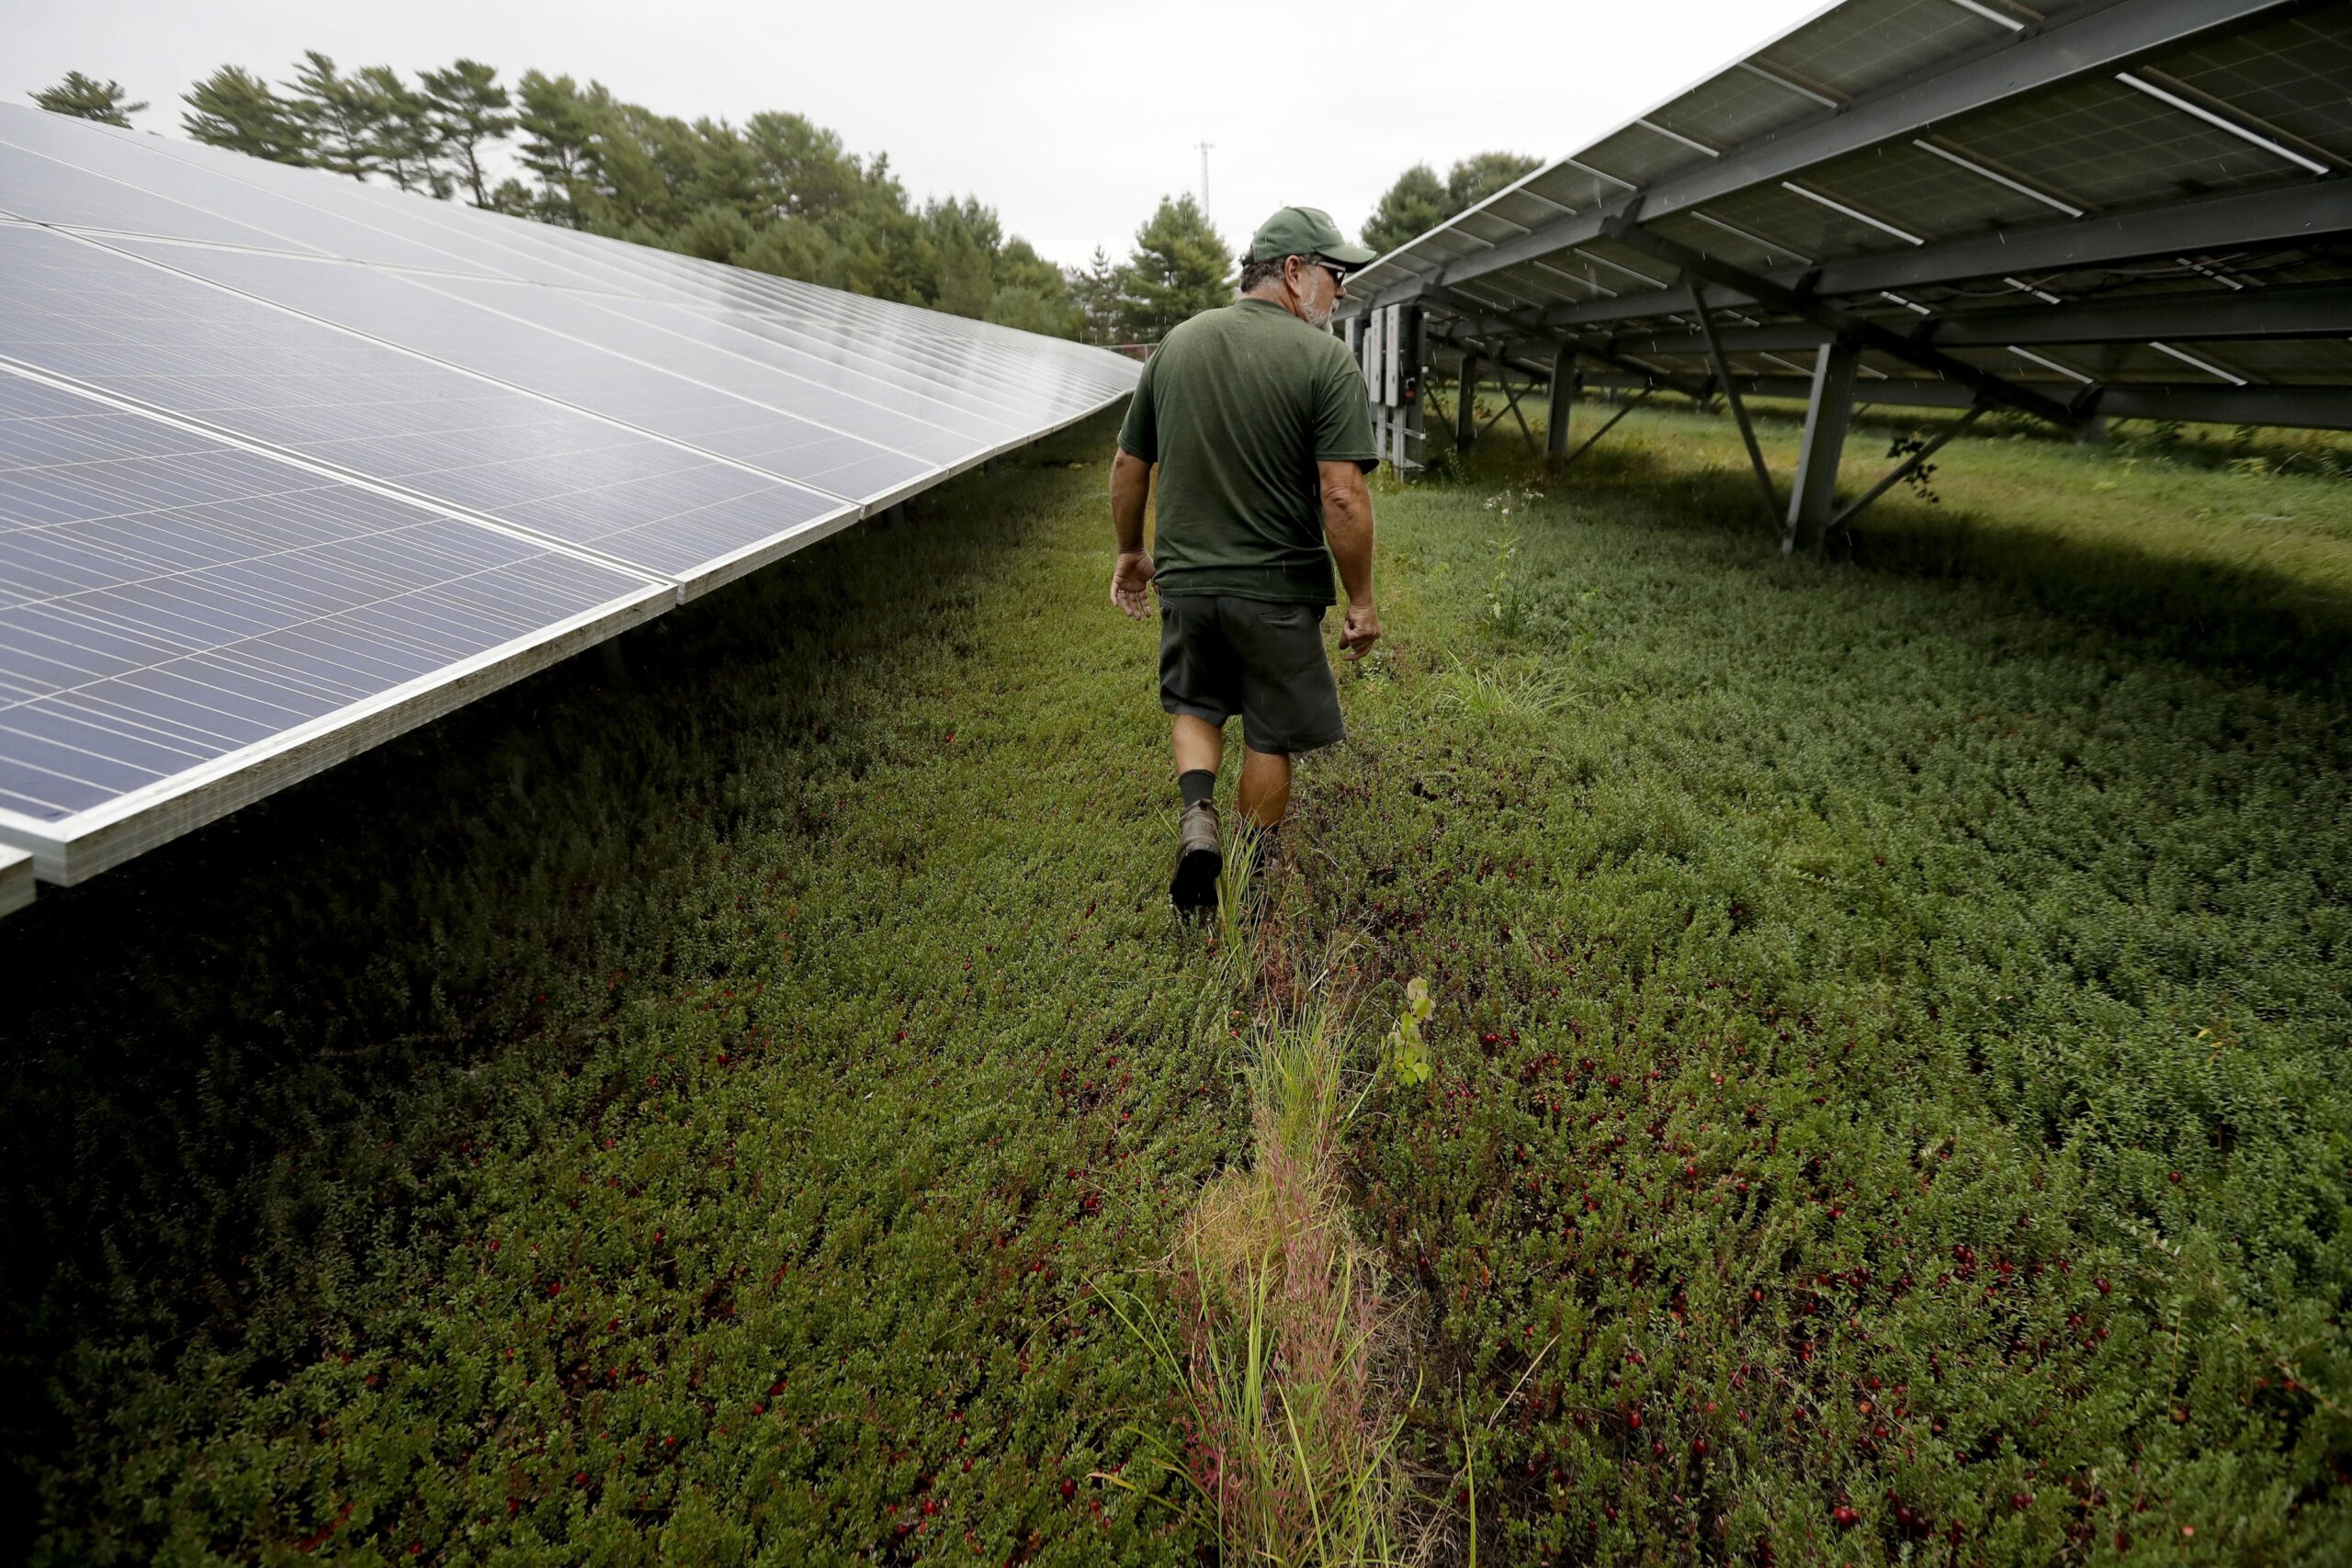 cranberry grower Mike Paduch walks among solar arrays in a cranberry bog at his farm